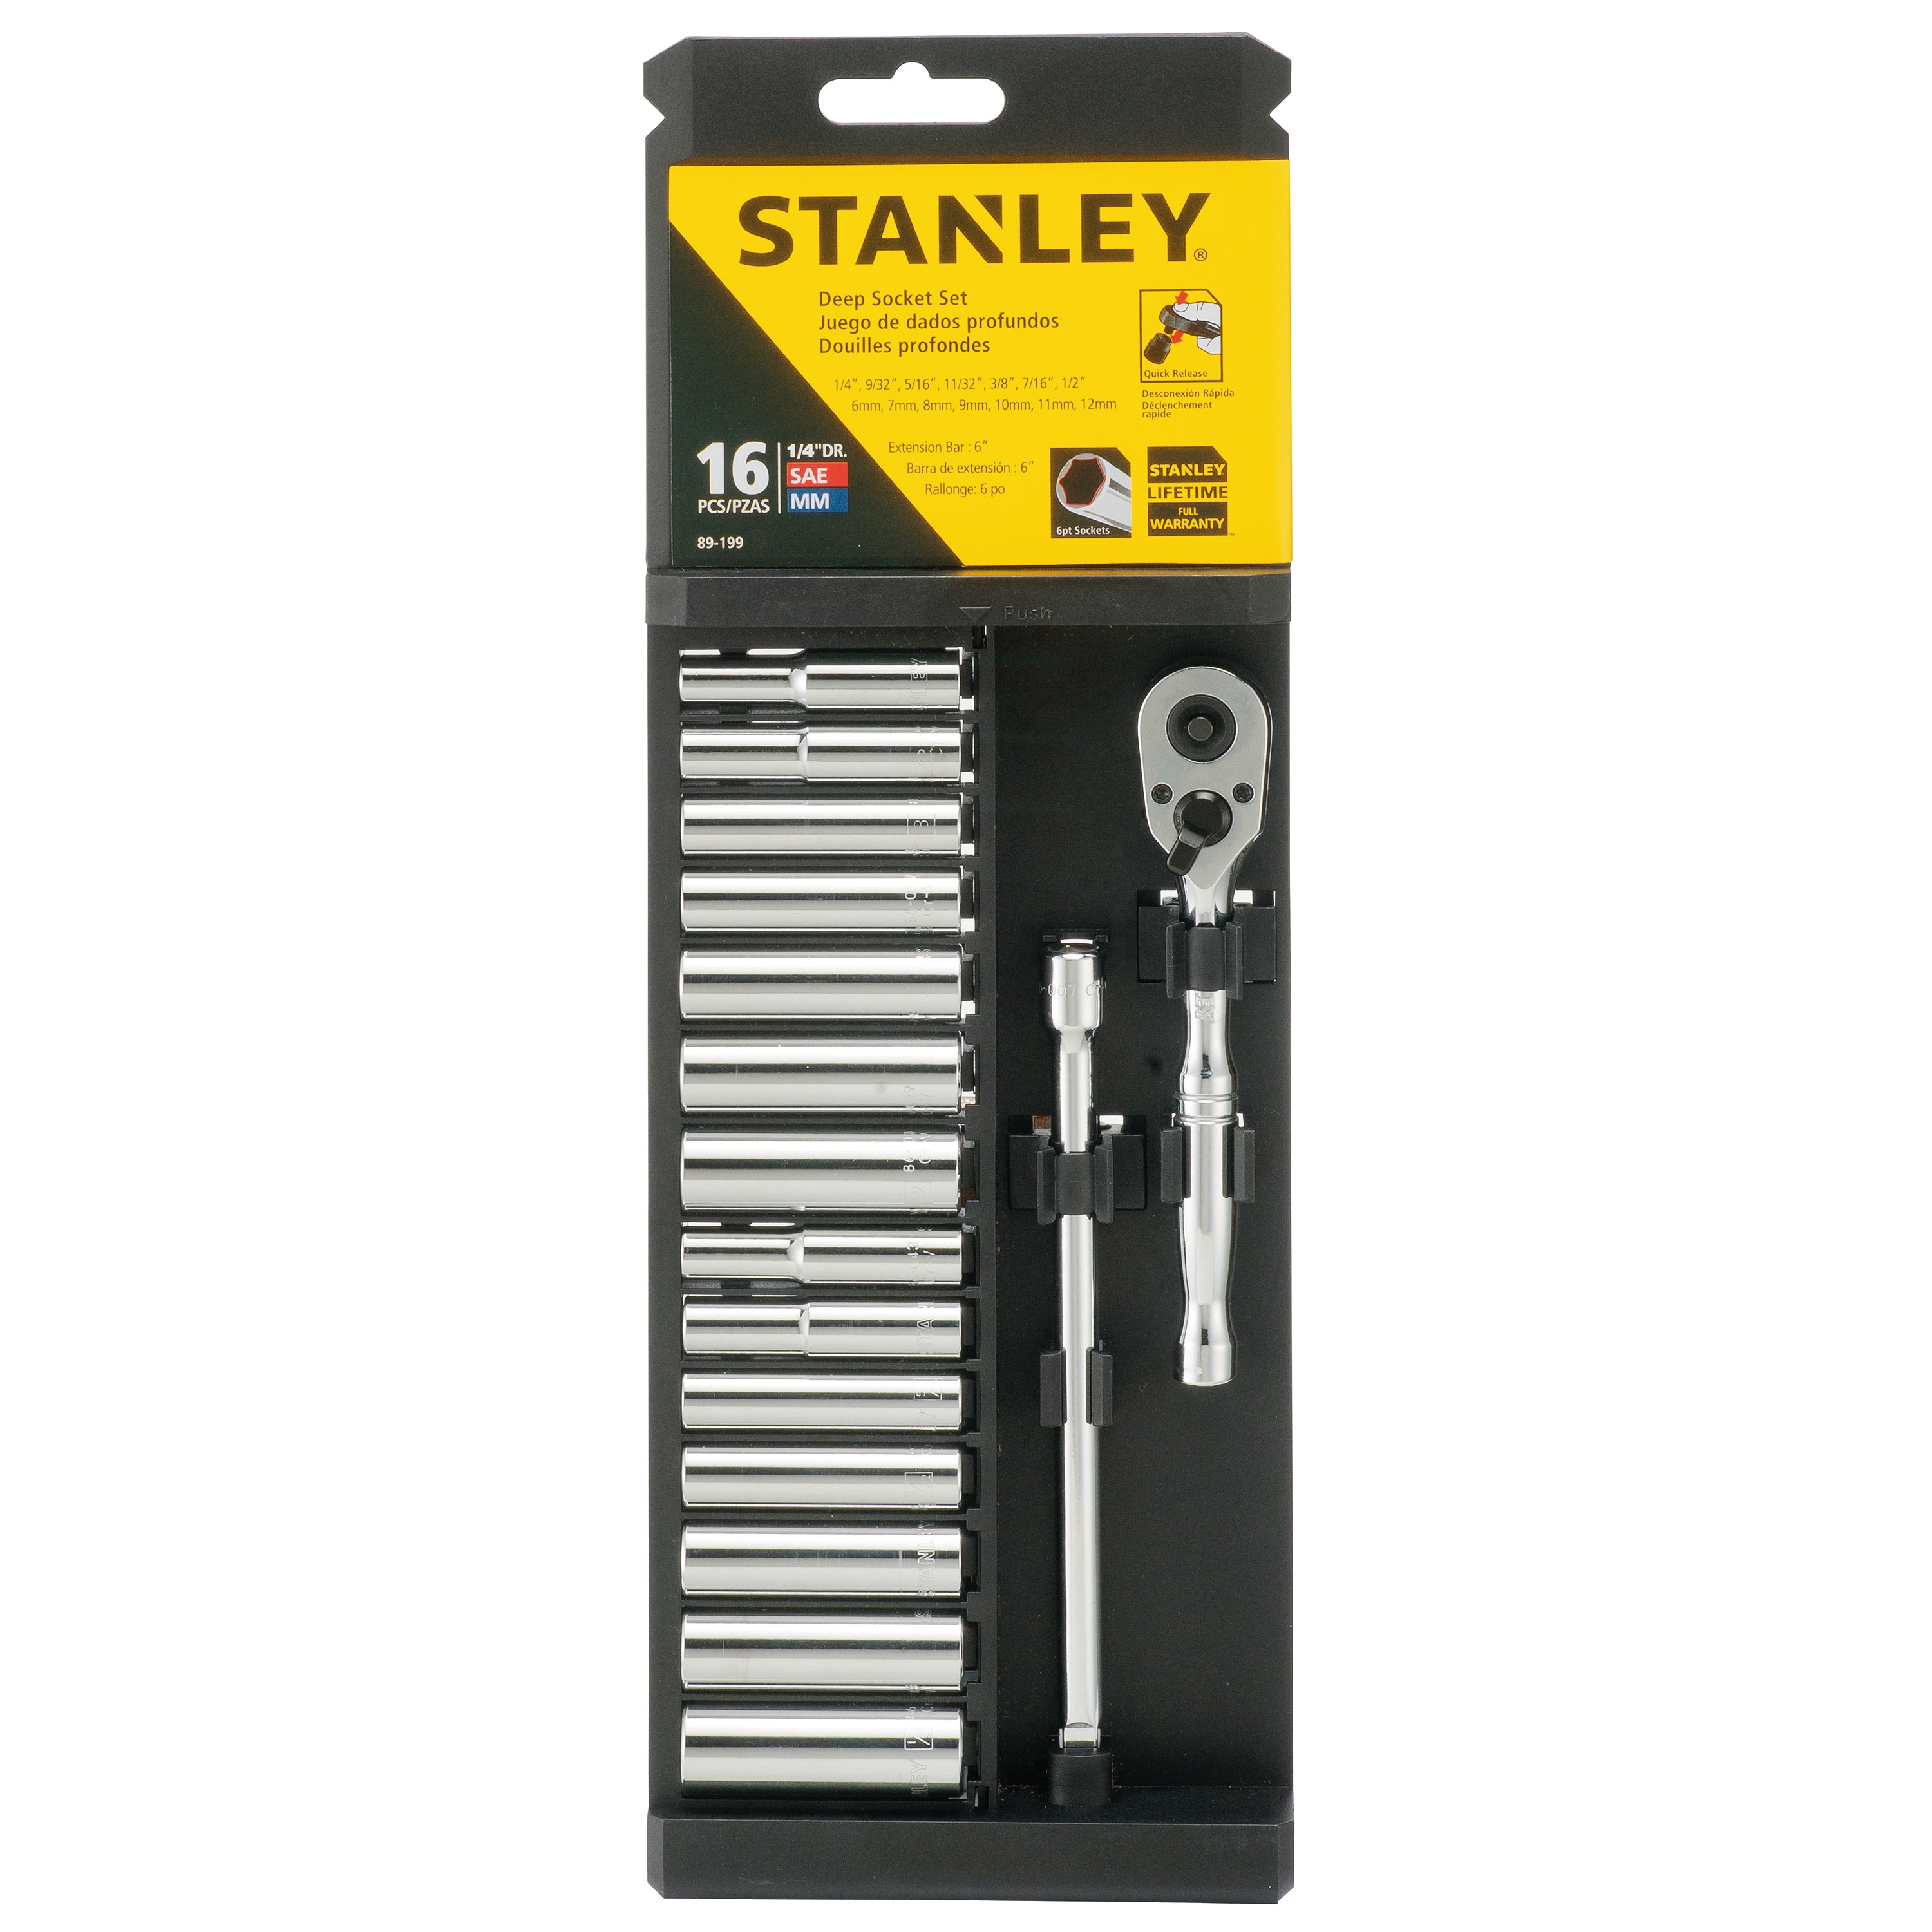 Stanley Tools - 16 pc Socket and Ratchet Set - 89-199